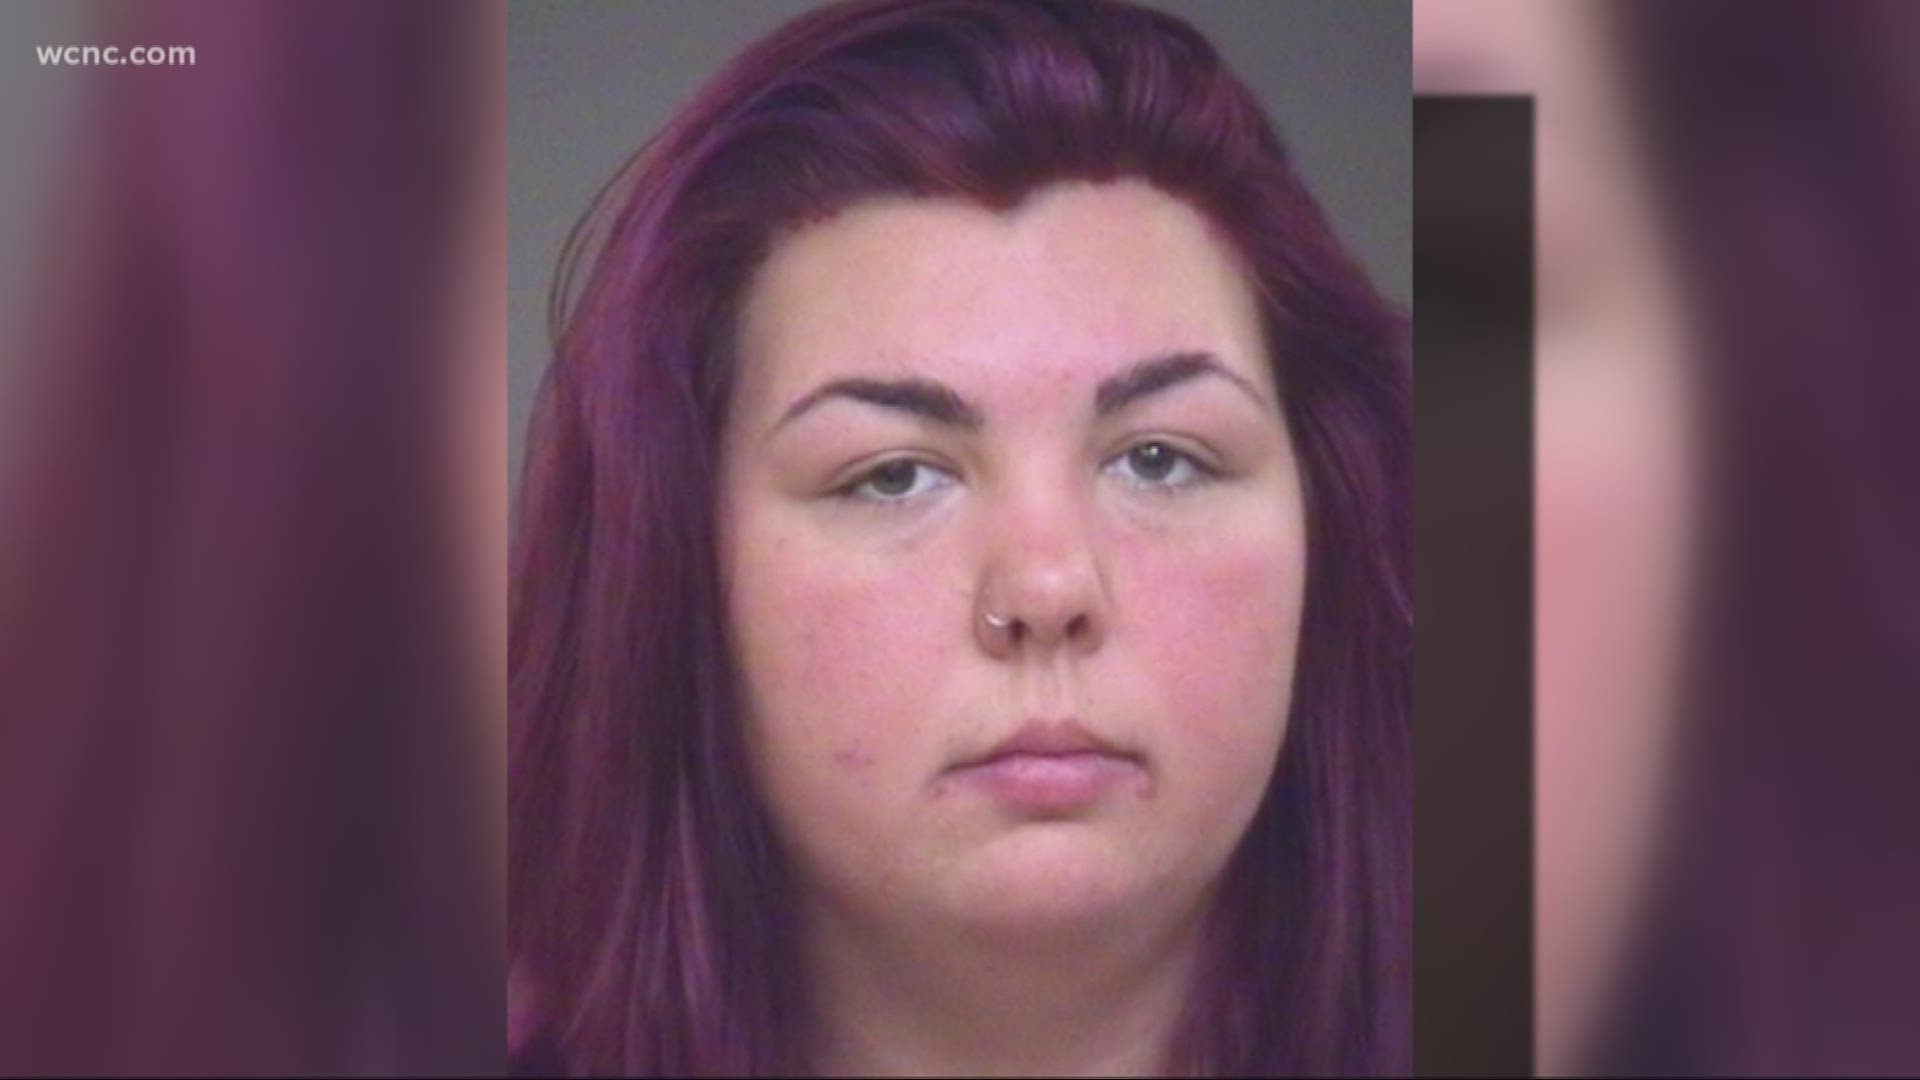 The daycare employee was seen on surveillance video pulling the hair of an 18-month-old girl, according to deputies.